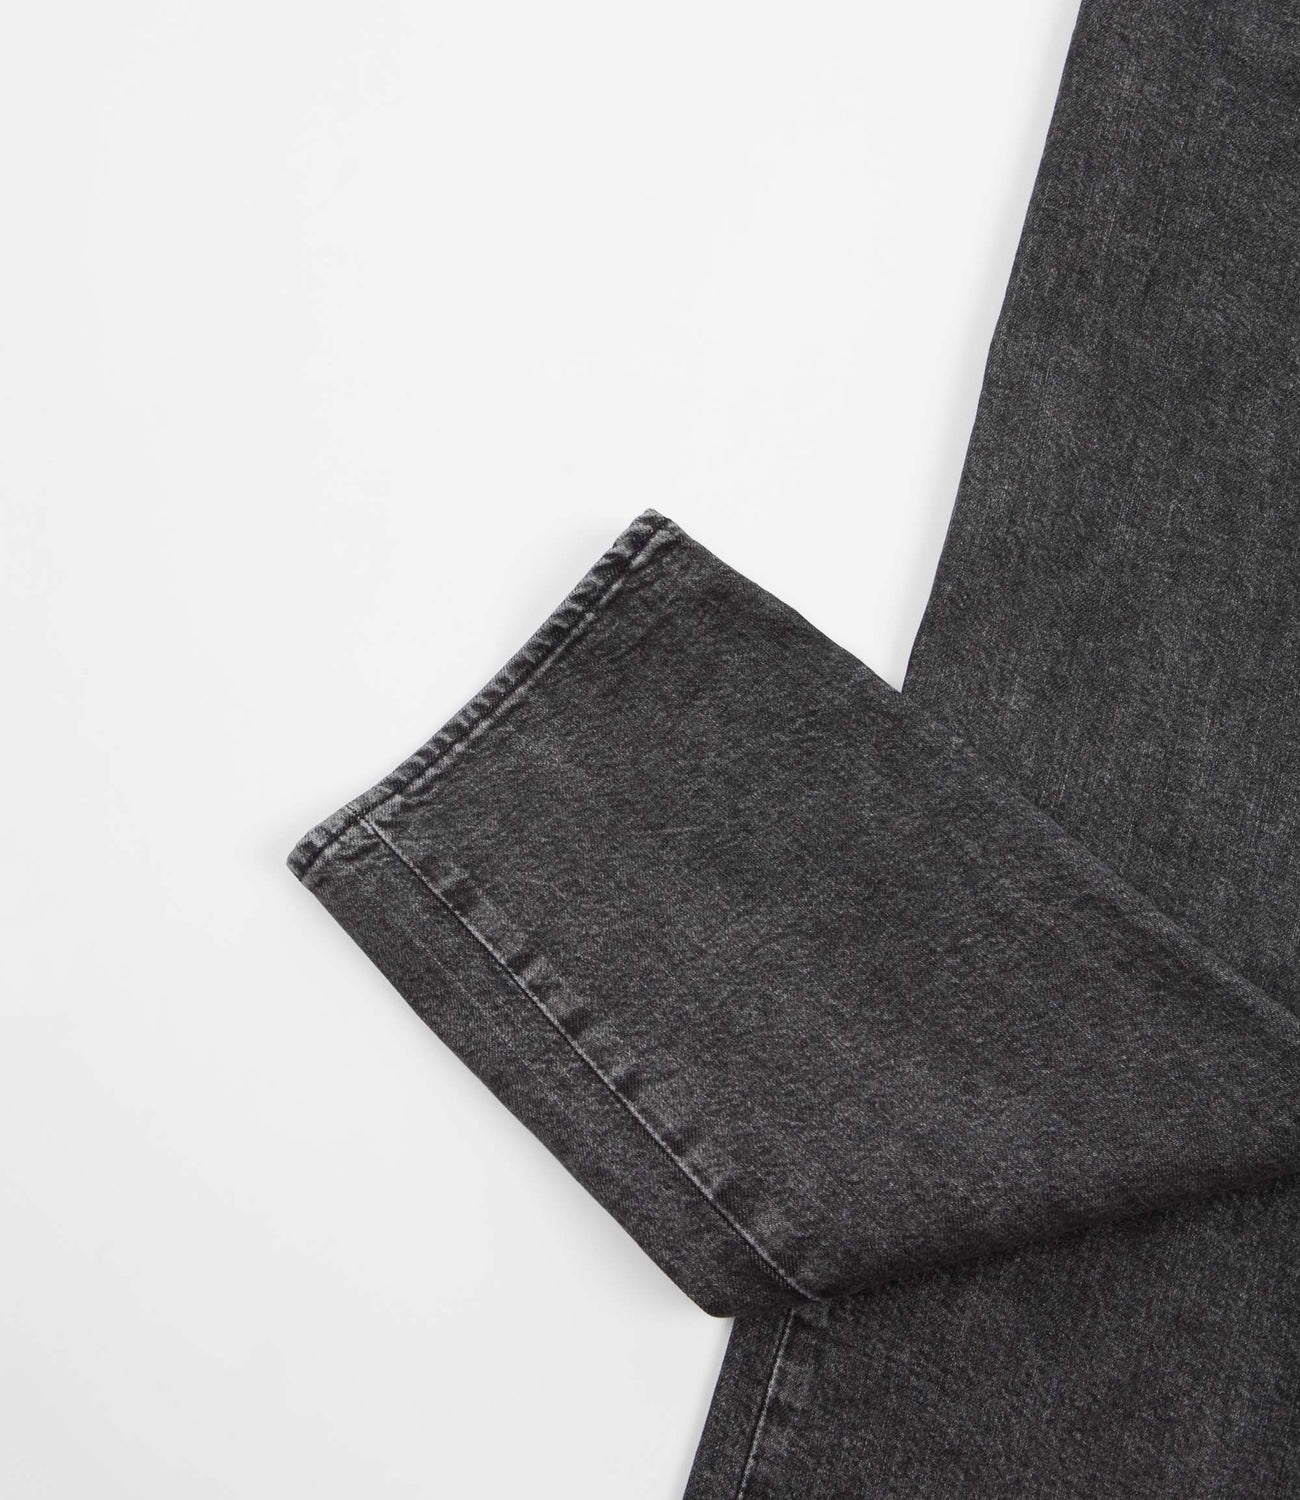 Levi's® Skate Quick Release Pants - Anthracite Nights